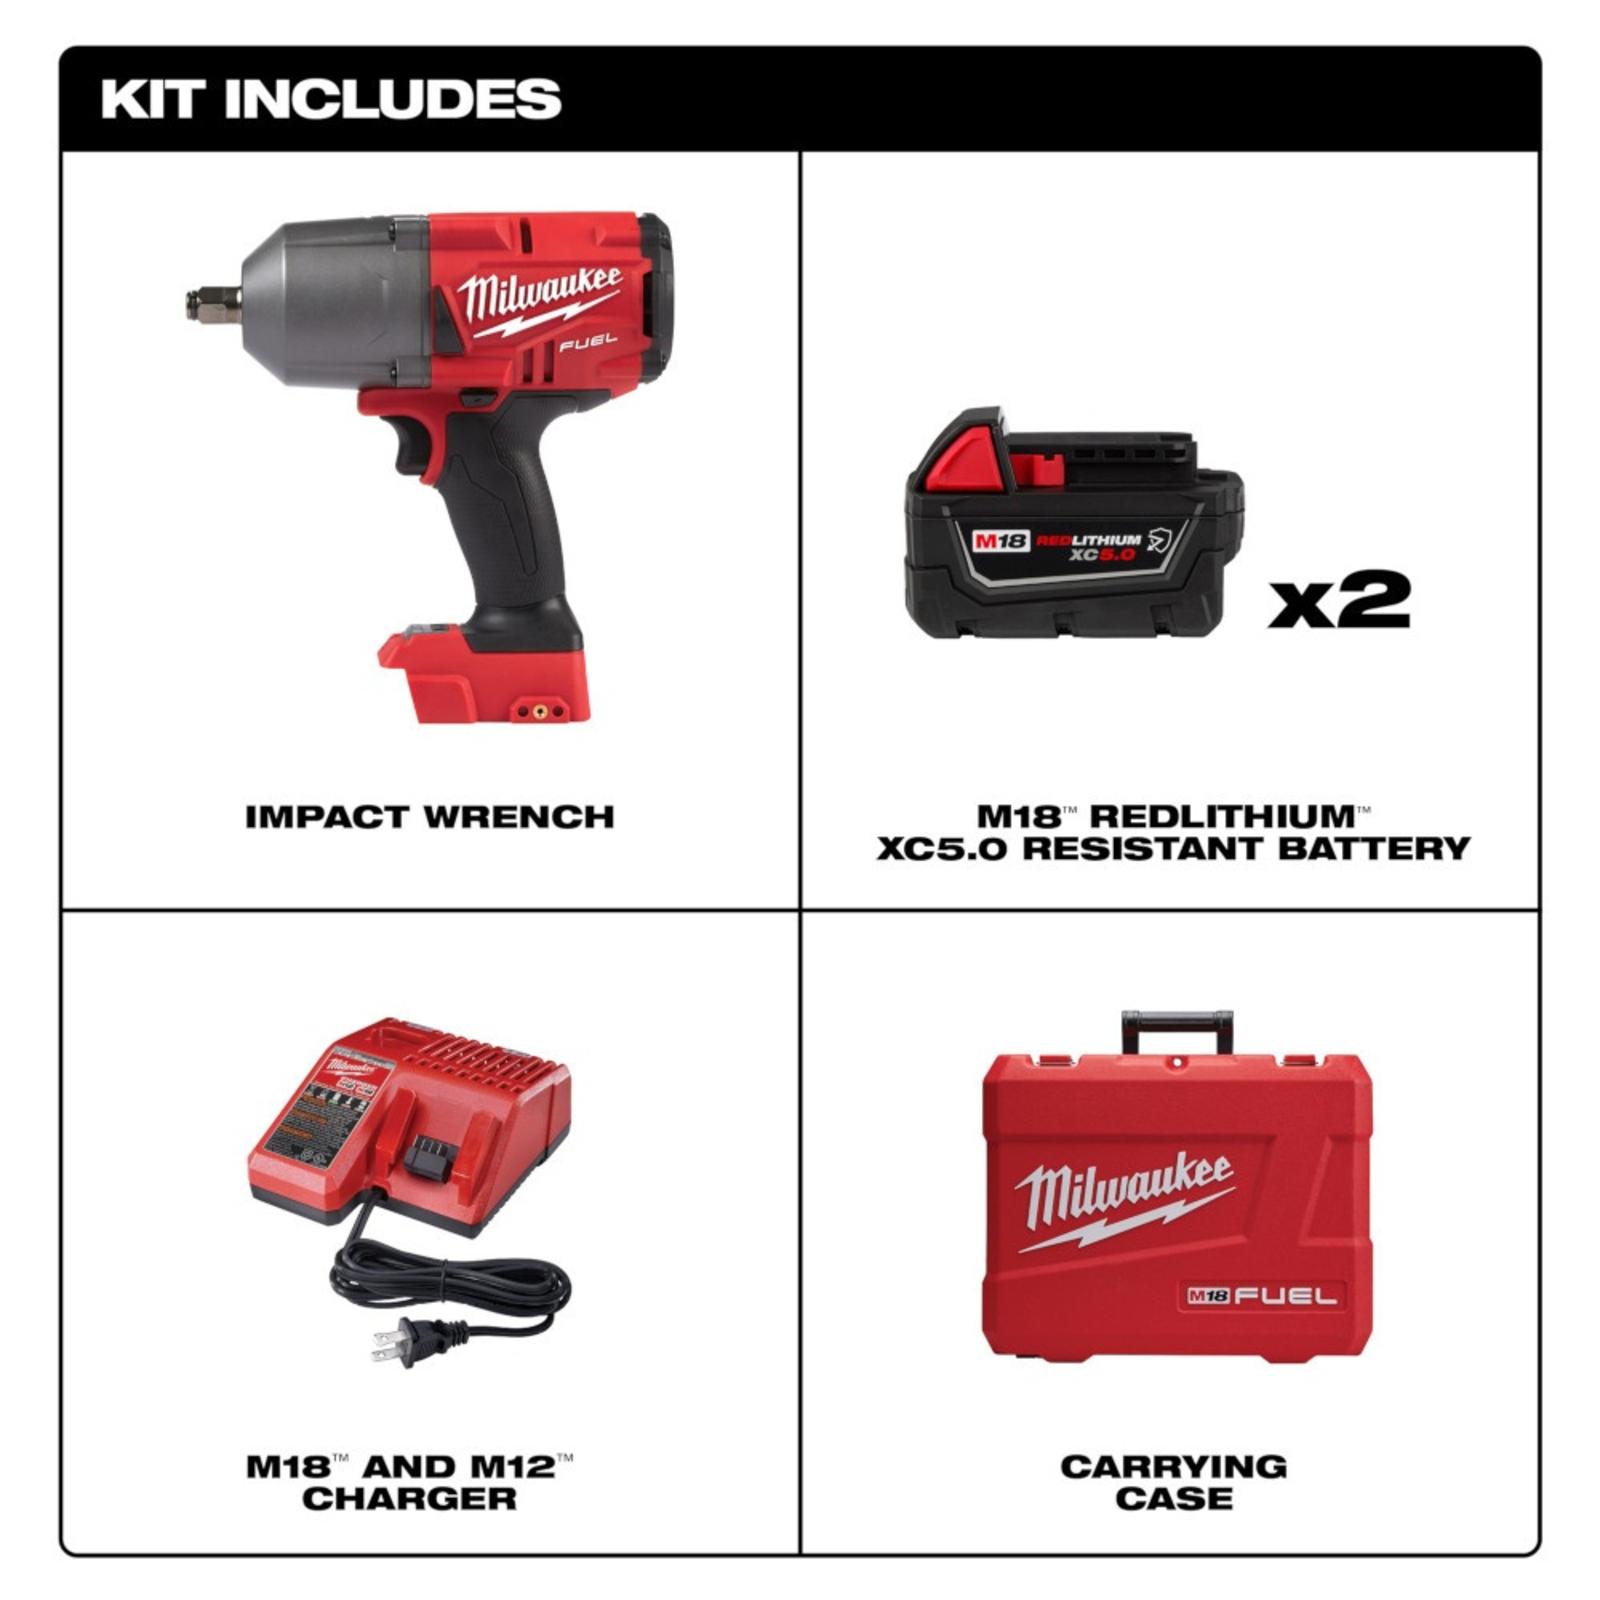 MILWAKUEE M18 FUEL™ High Torque ½” Impact Wrench with Friction Ring Kit